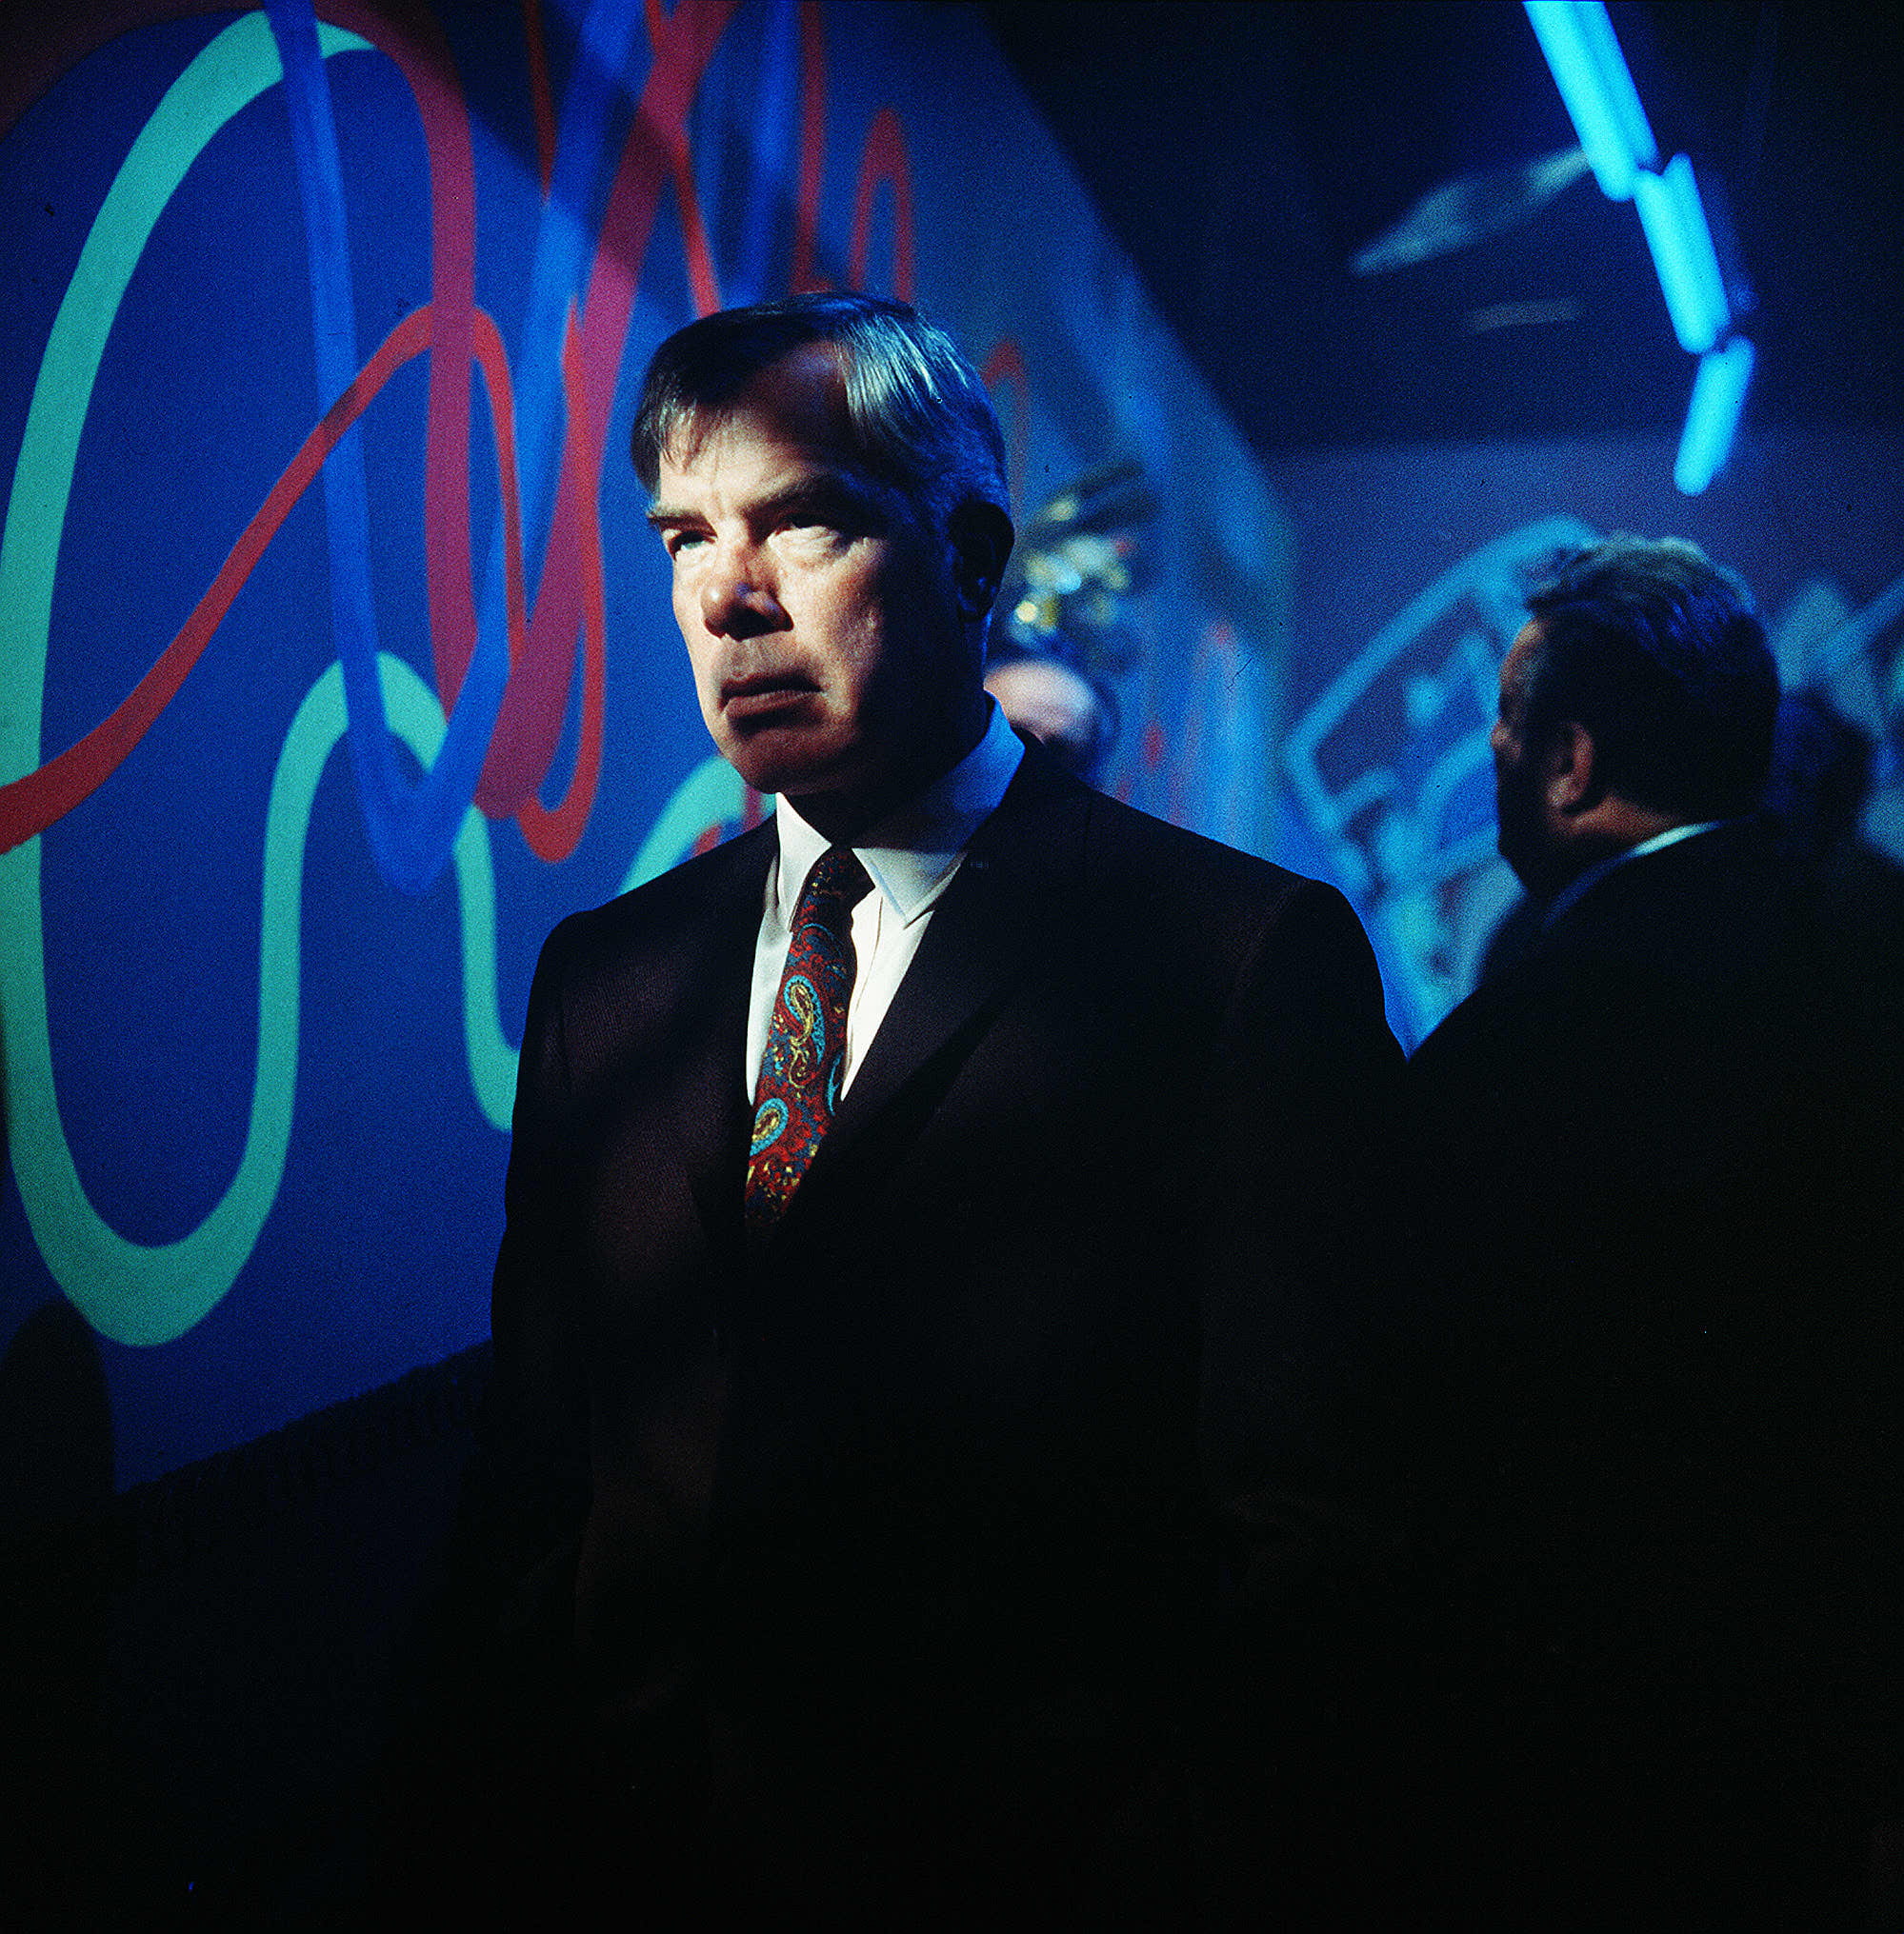 Lee Marvin in John Boorman's POINT BLANK Credit: [ MGM / THE KOBAL COLLECTION ]